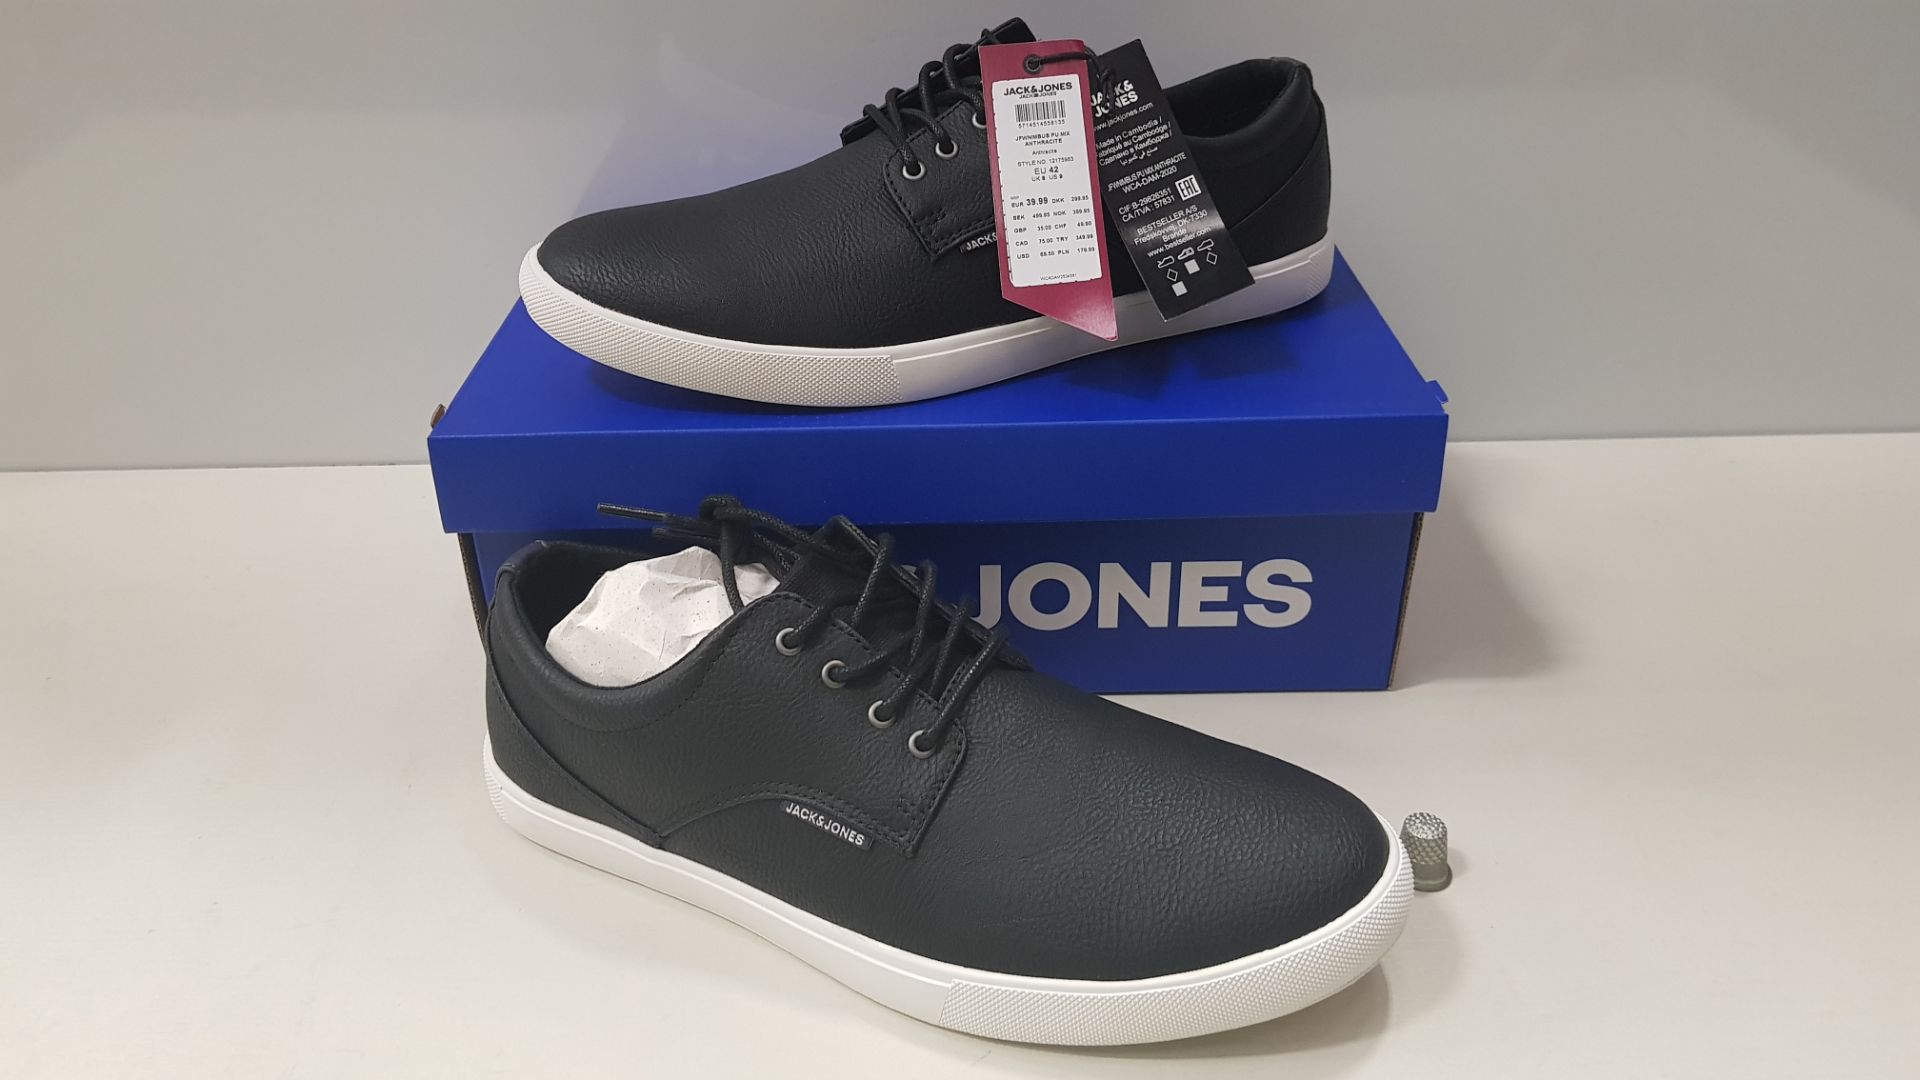 7 X BRAND NEW JACK & JONES ANTHRACITE TRAINERS UK SIZE 8 RRP £35.00 (TOTAL RRP £245.00)